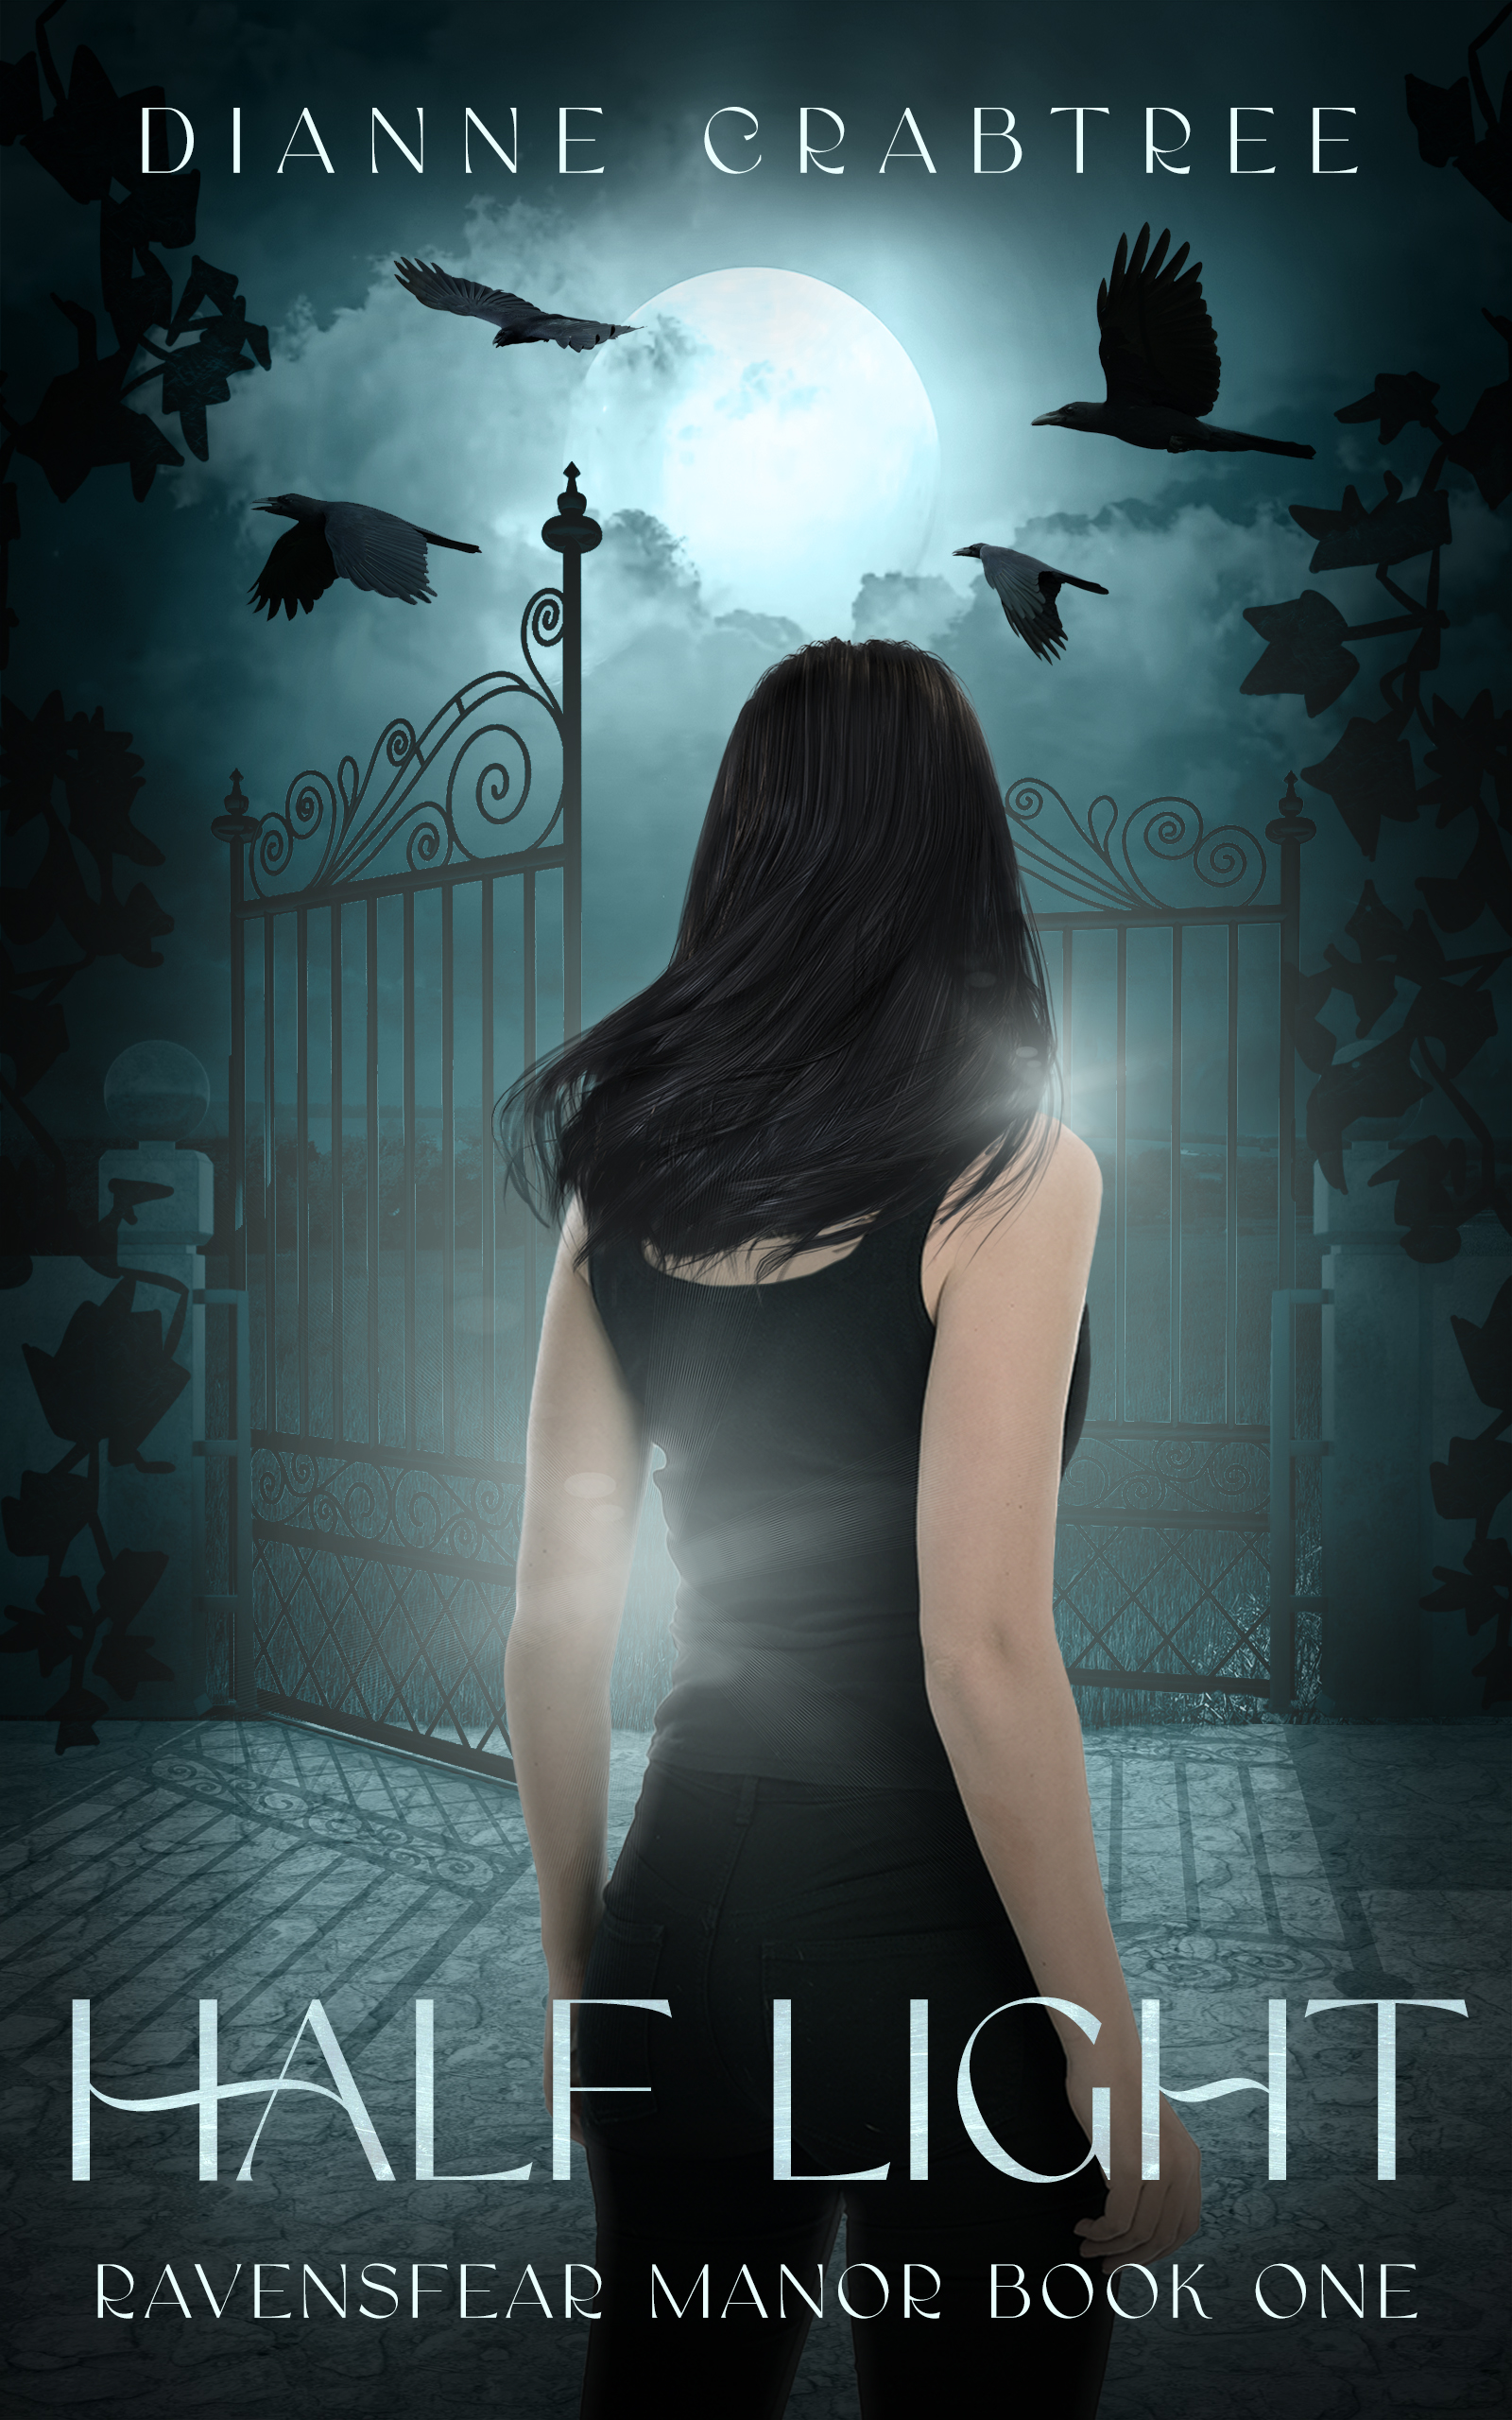 YA fantasy book cover with girl in front of moonlit gate. 